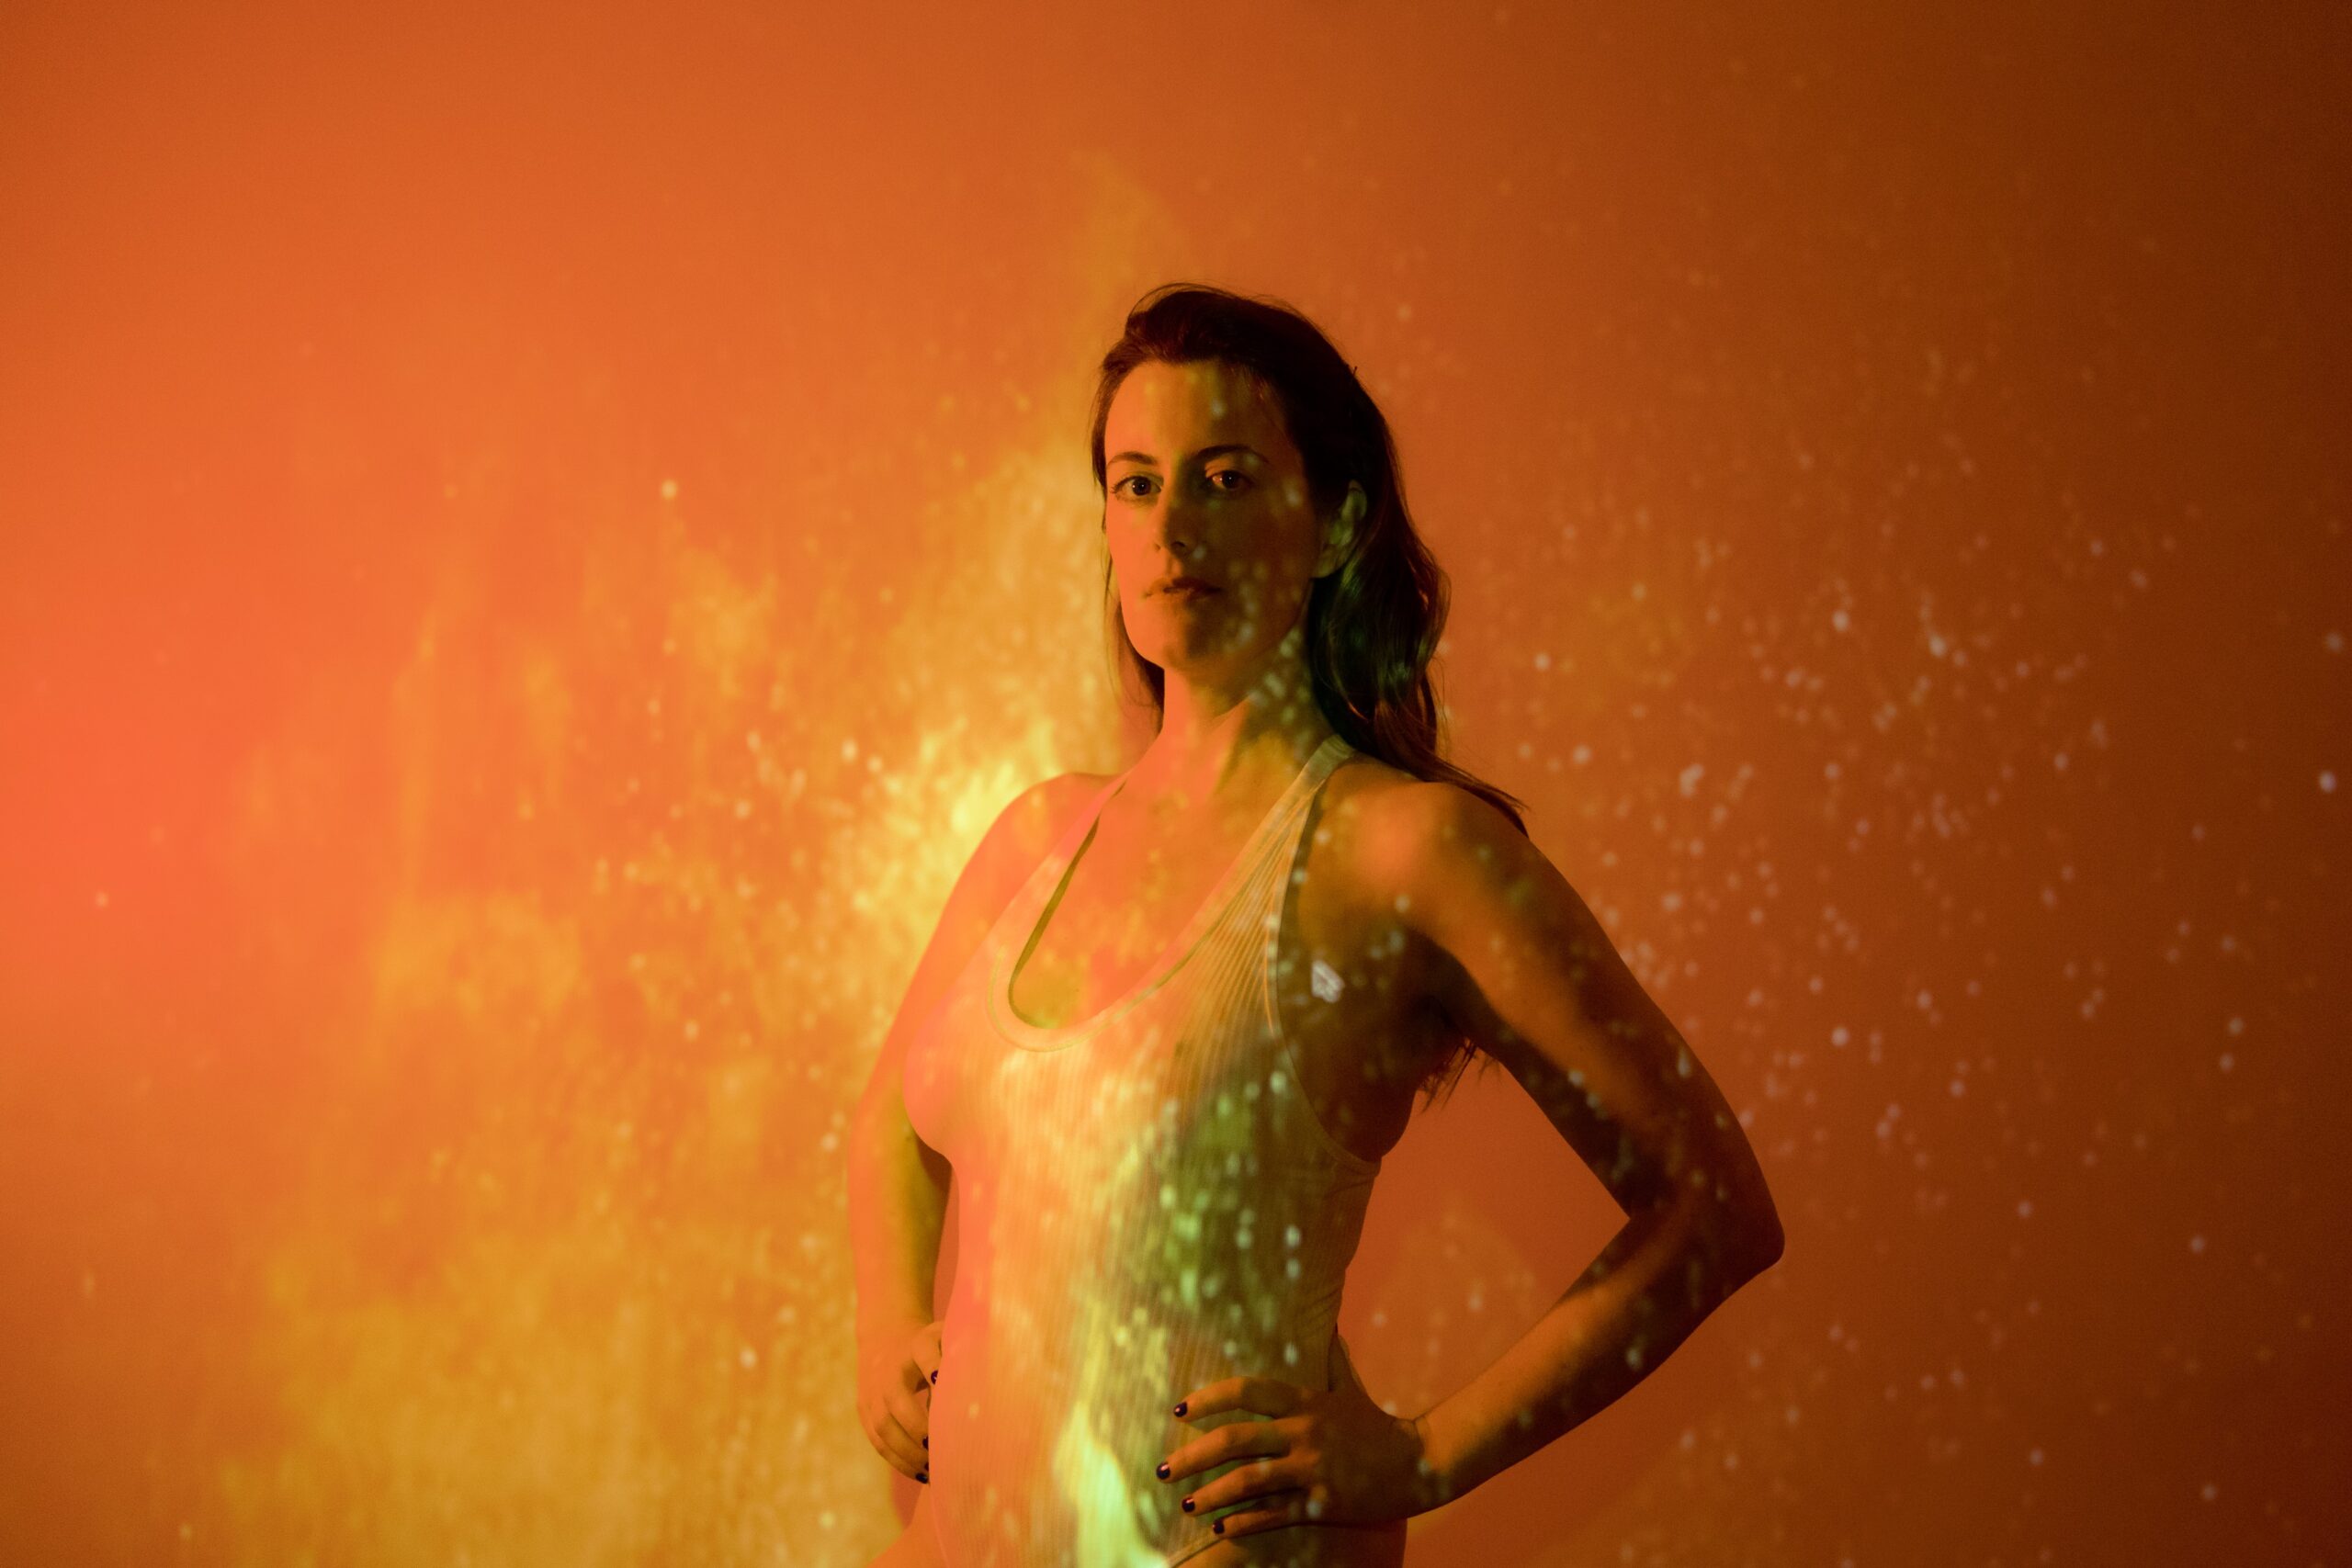 A radiating Skylar in a sequined sleeveless dress against an orange background